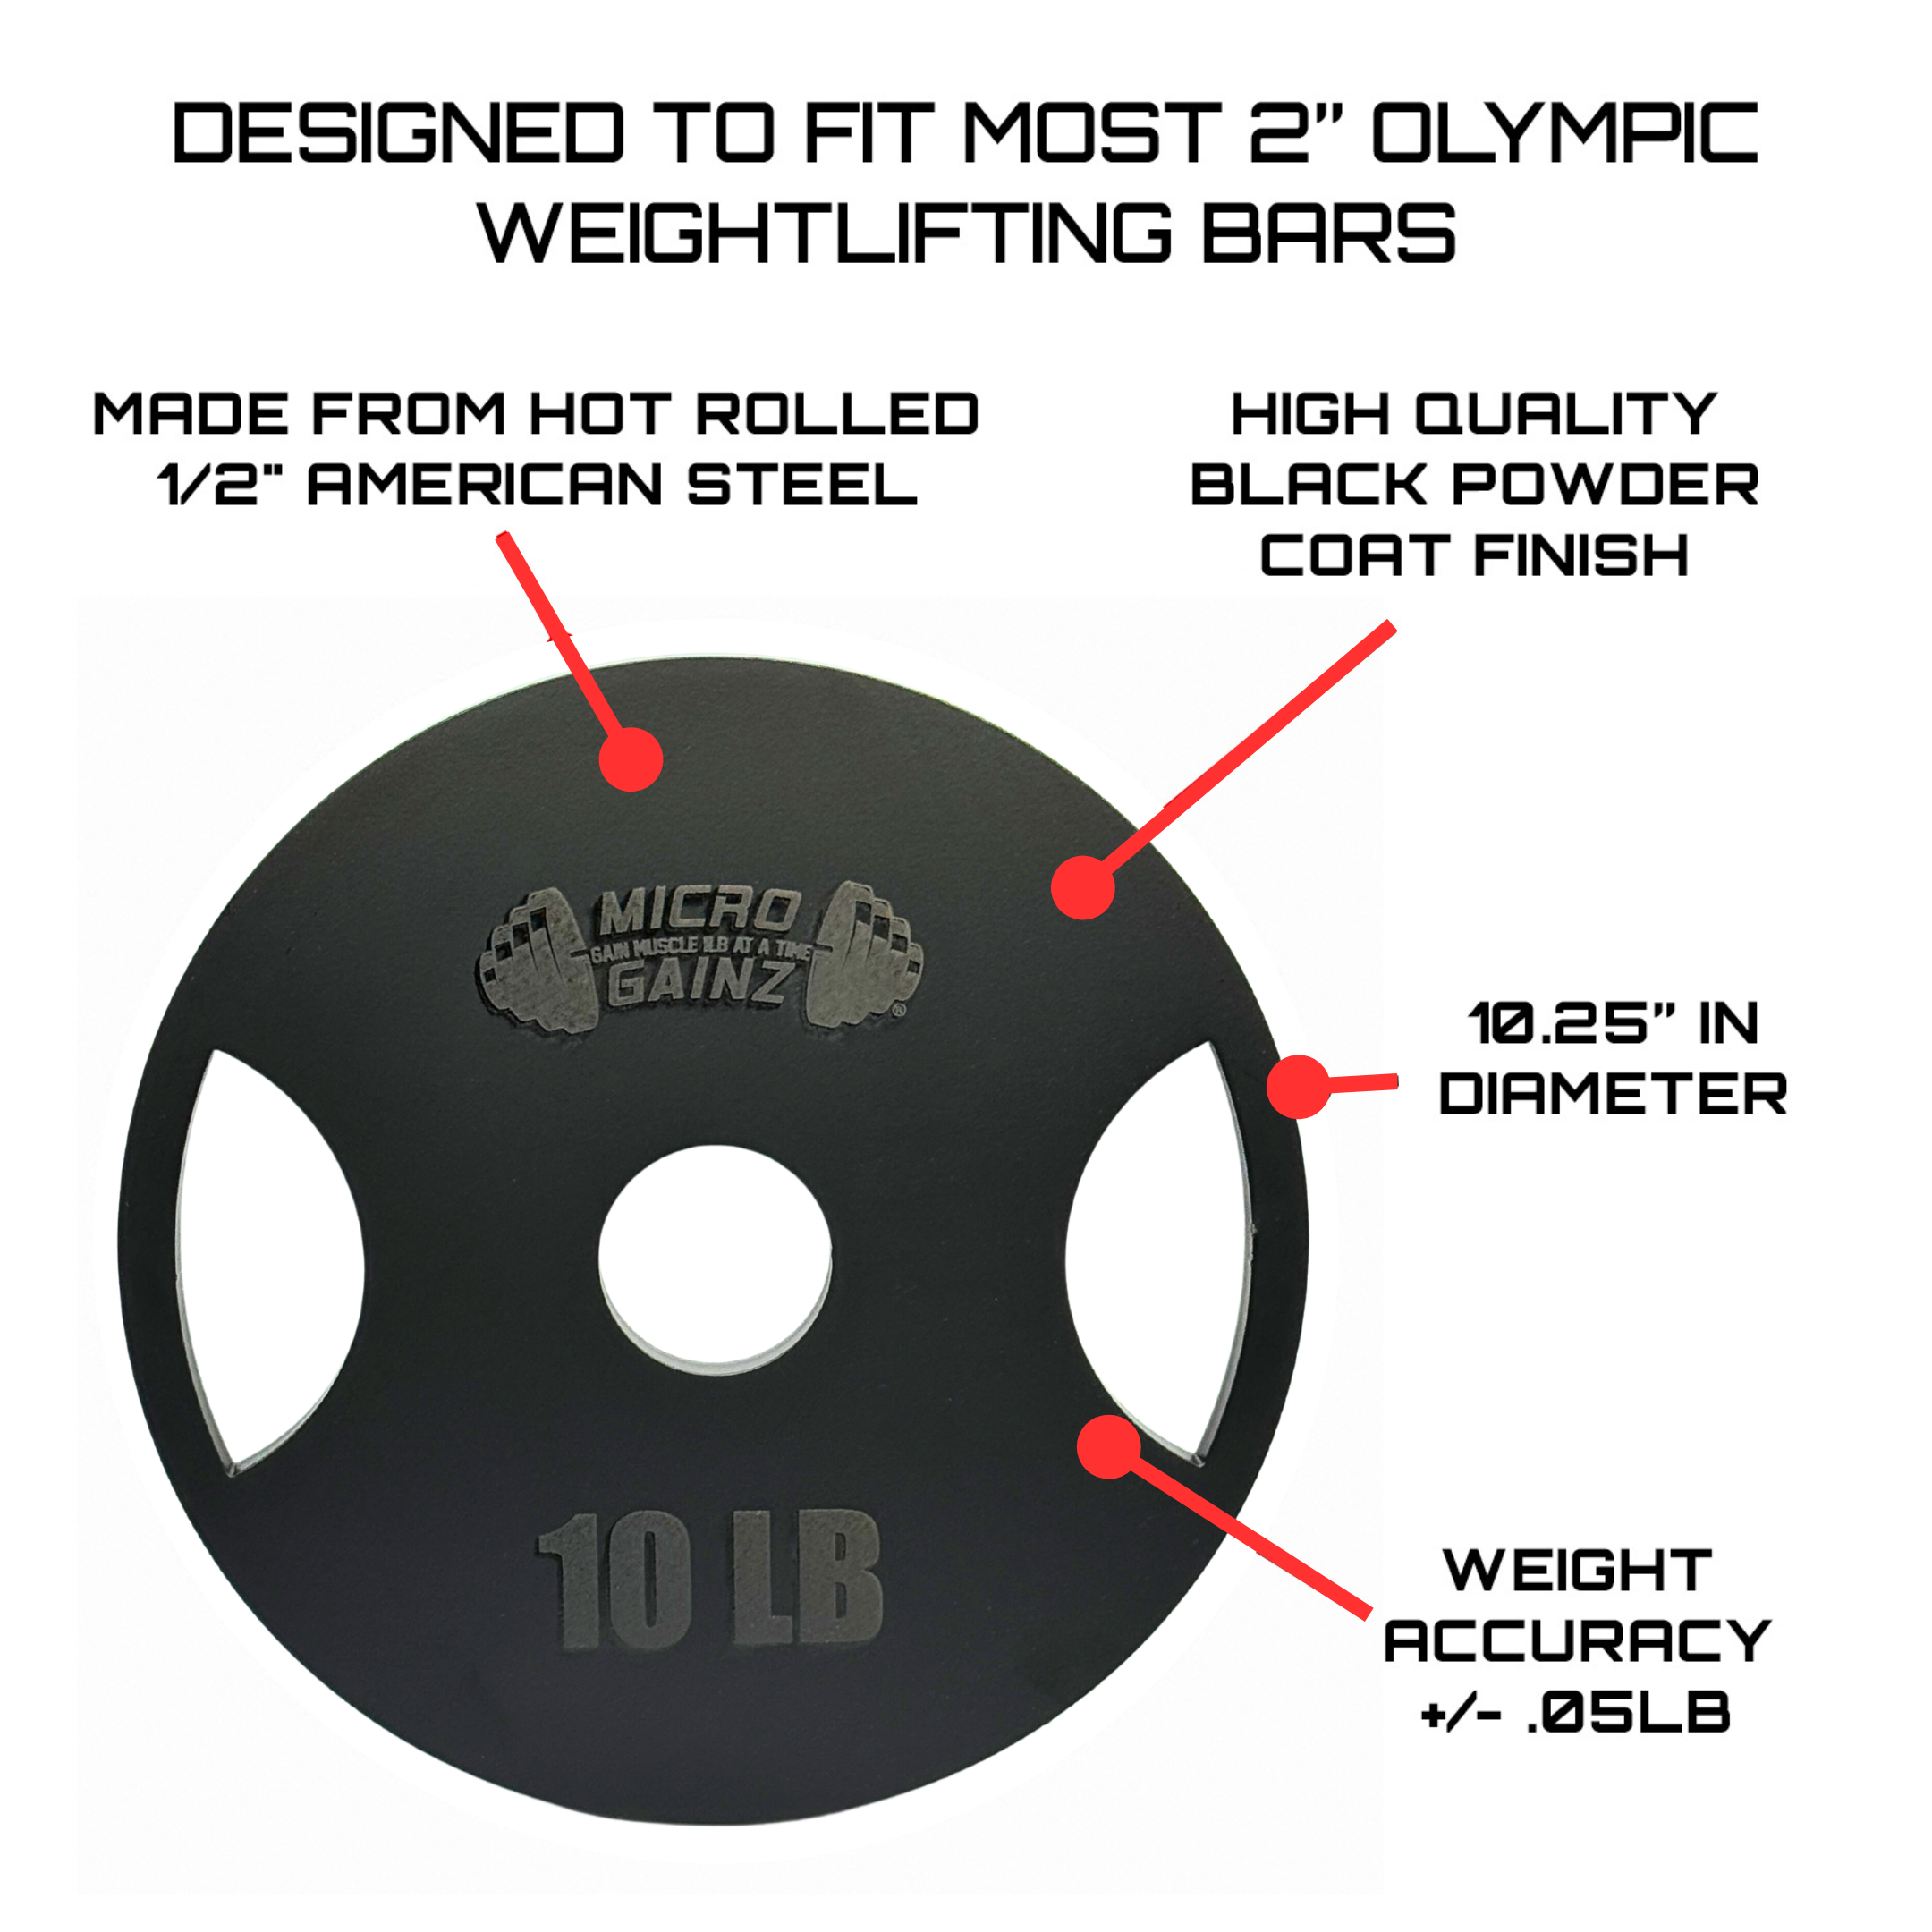 Micro Gainz Gym Pack of Olympic Weight Plates Set of 16 Total Plates (.25lb thru 10lb)